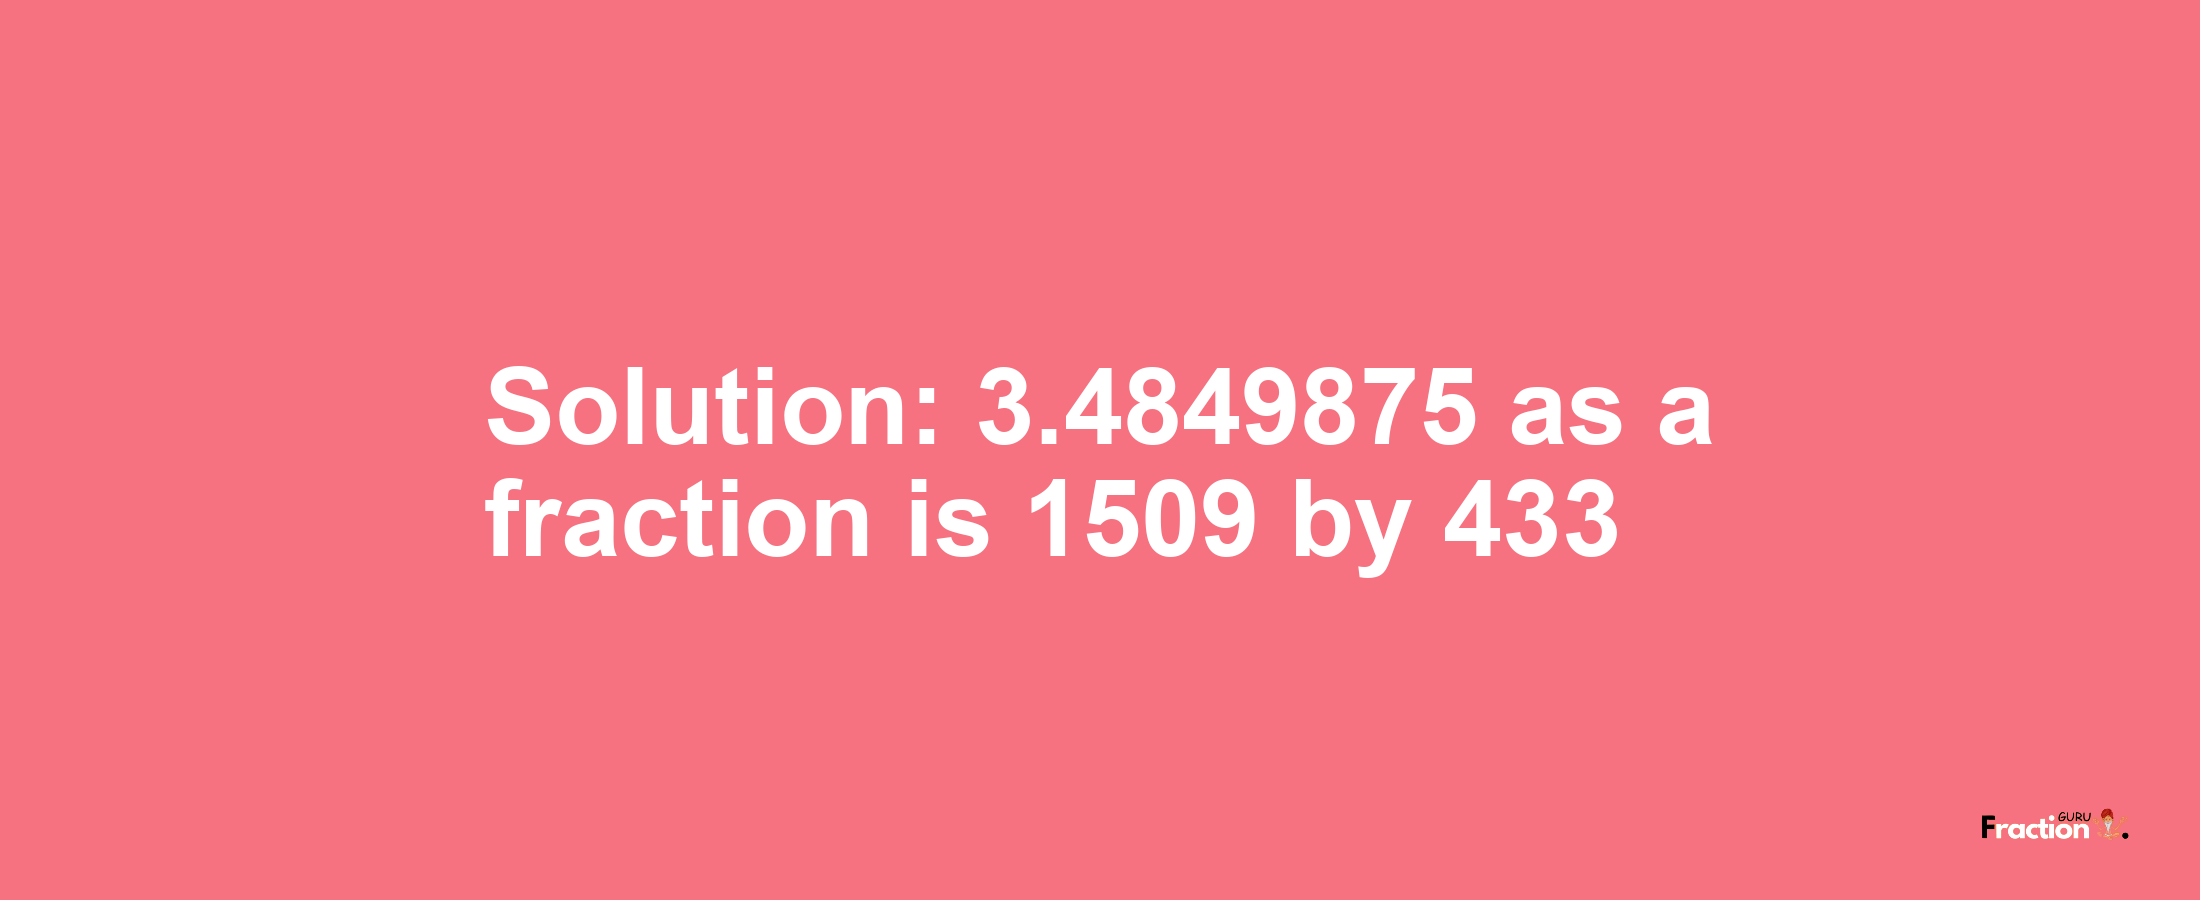 Solution:3.4849875 as a fraction is 1509/433